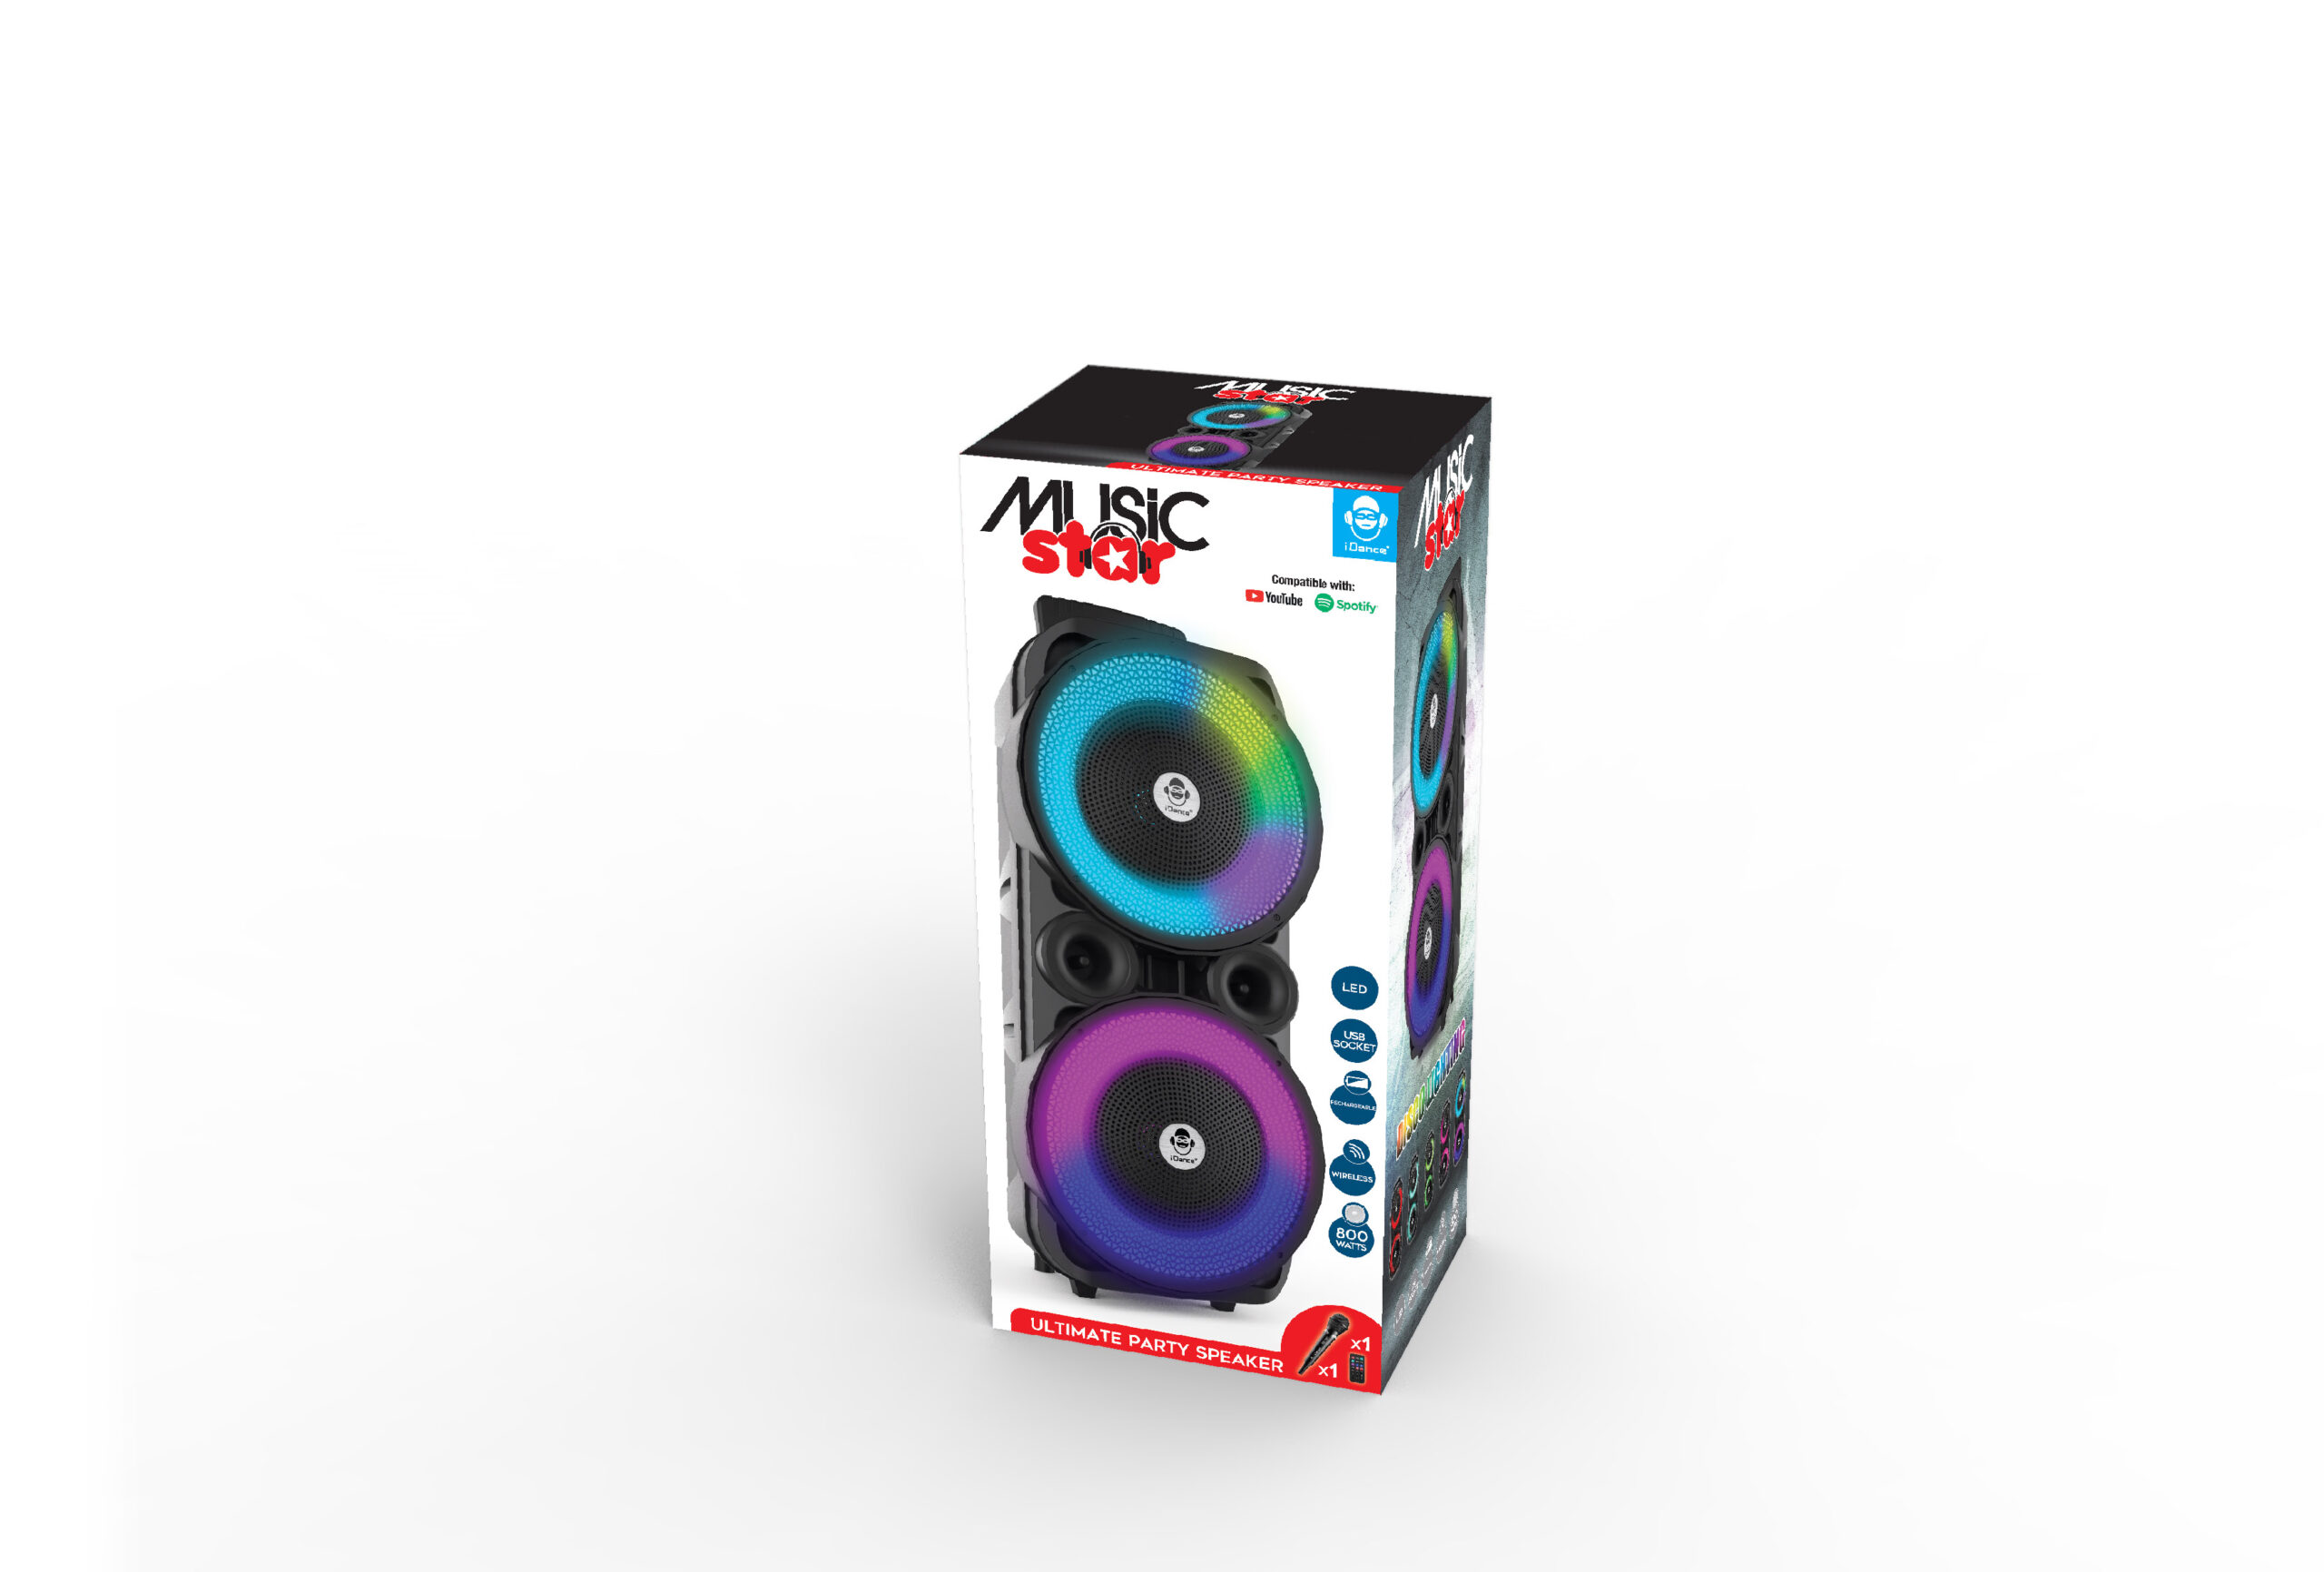 Ultimate party speaker 800w - MUSIC STAR